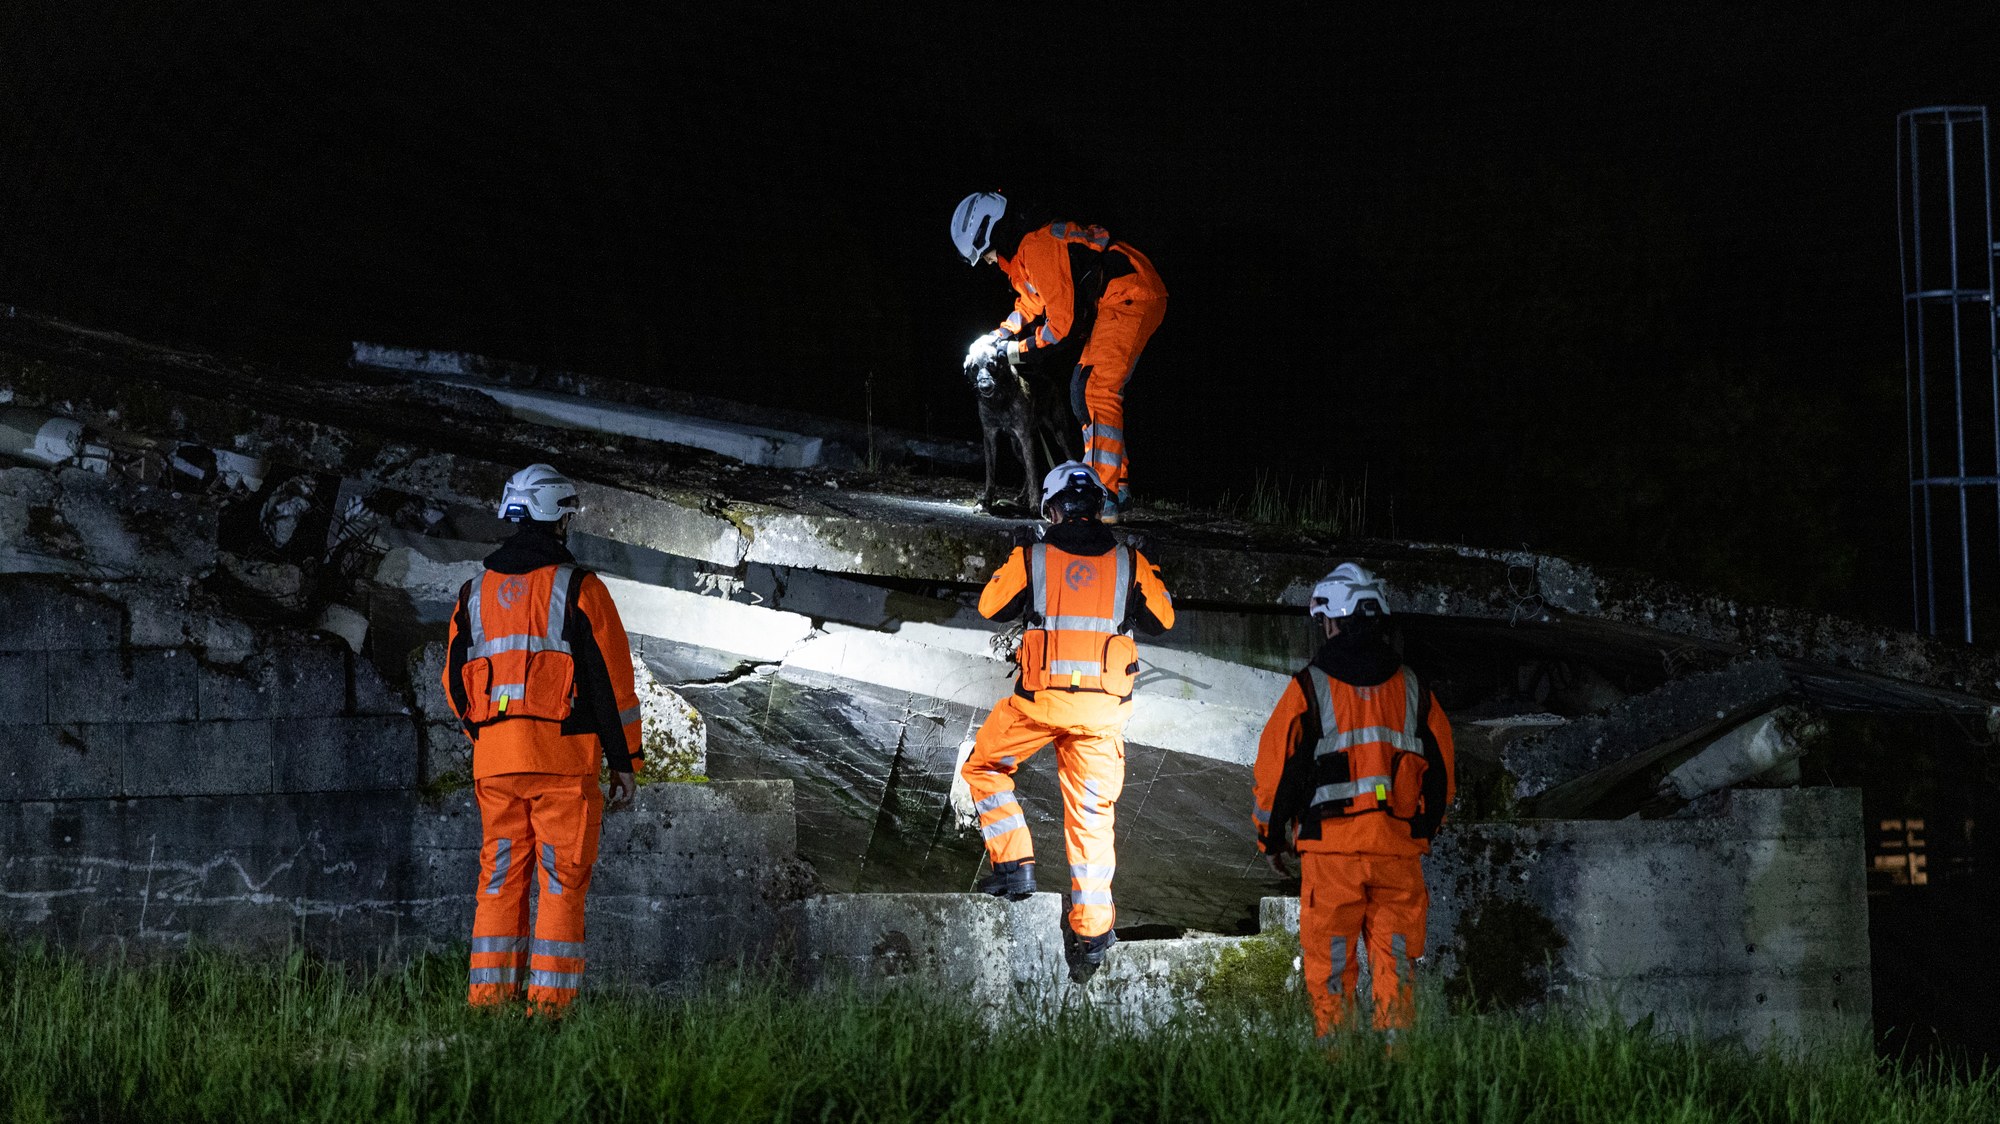 The Swiss Rescue team during night-time search and rescue operations